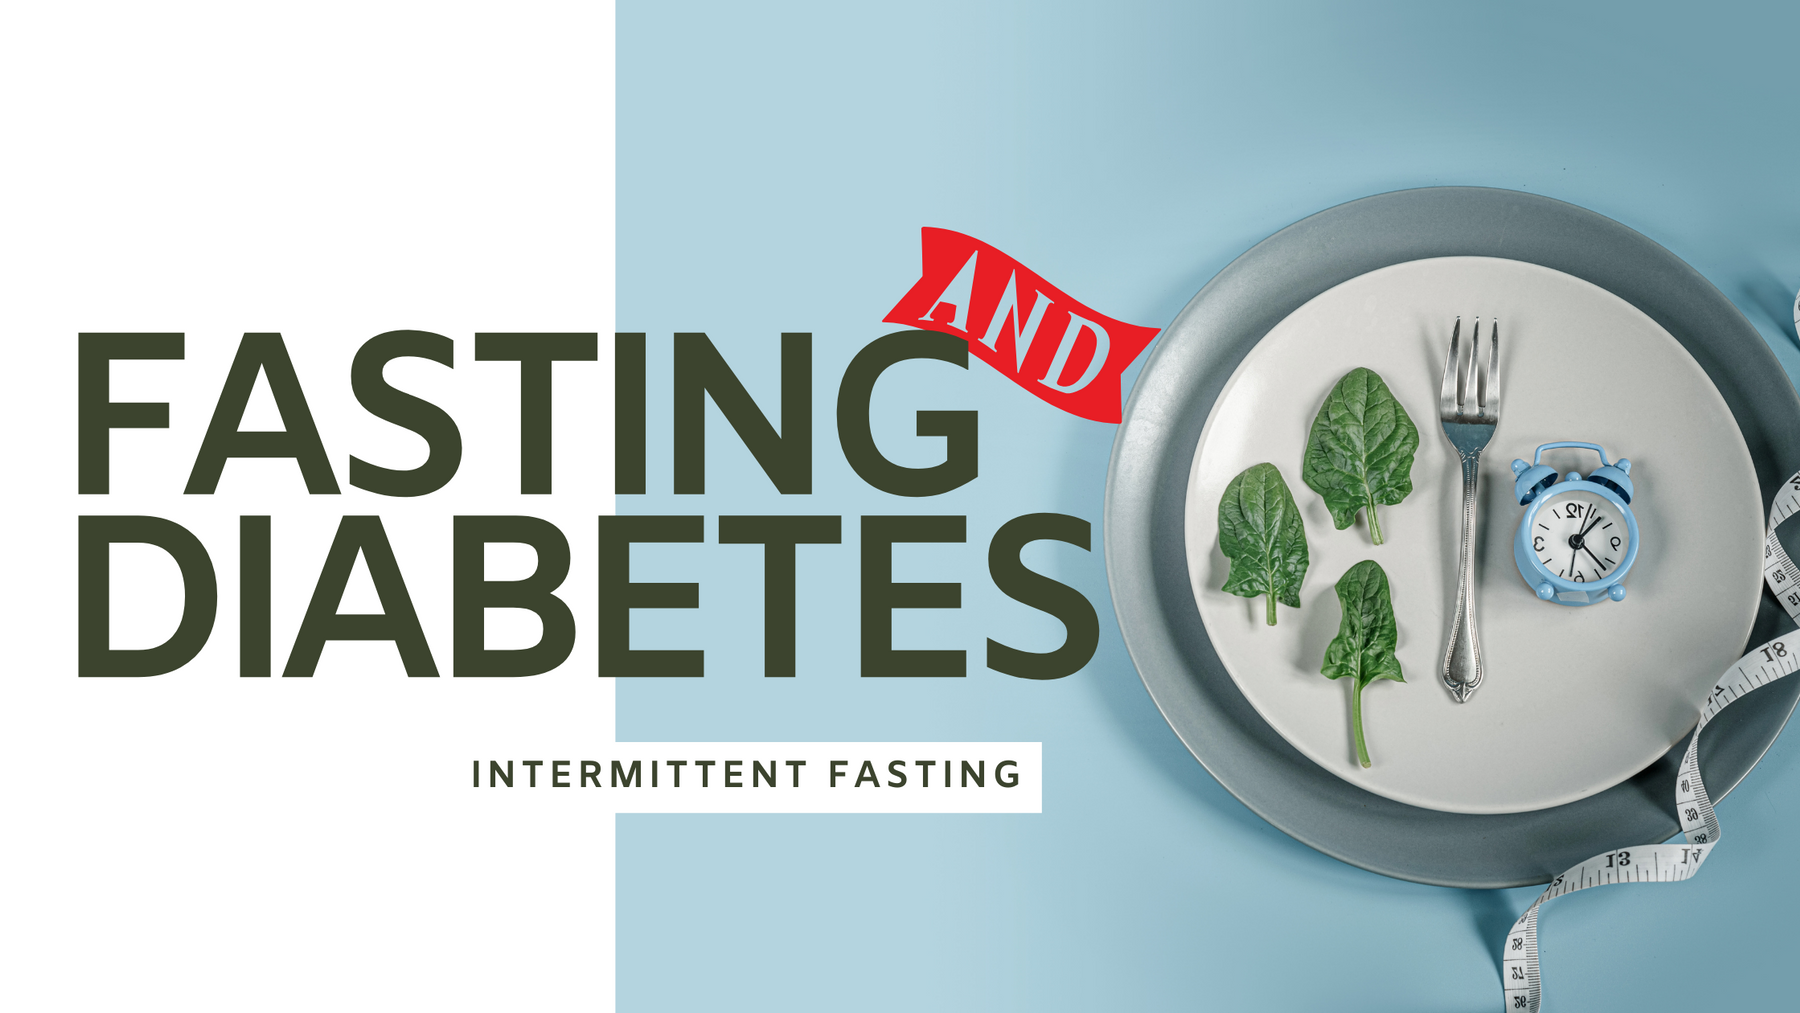 Does Intermittent Fasting help with Diabetes Management?